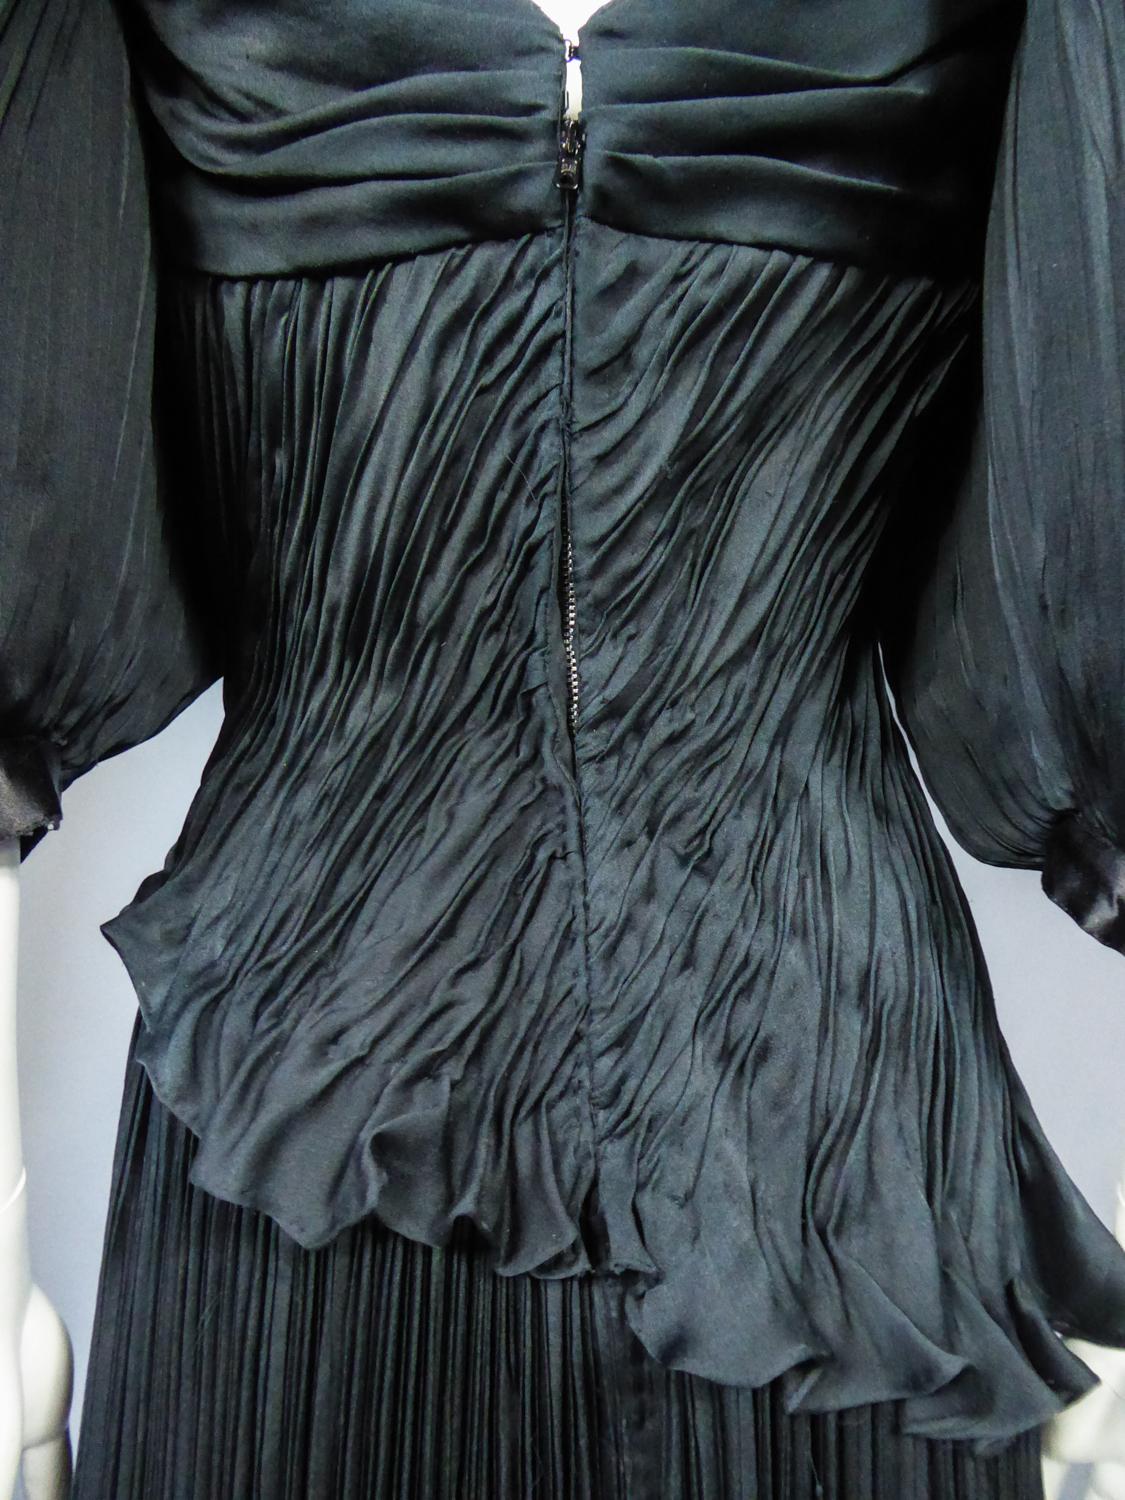 An Emanuel Ungaro French Evening Dress Numbered 295-5-85 Circa 1985/1990 For Sale 10